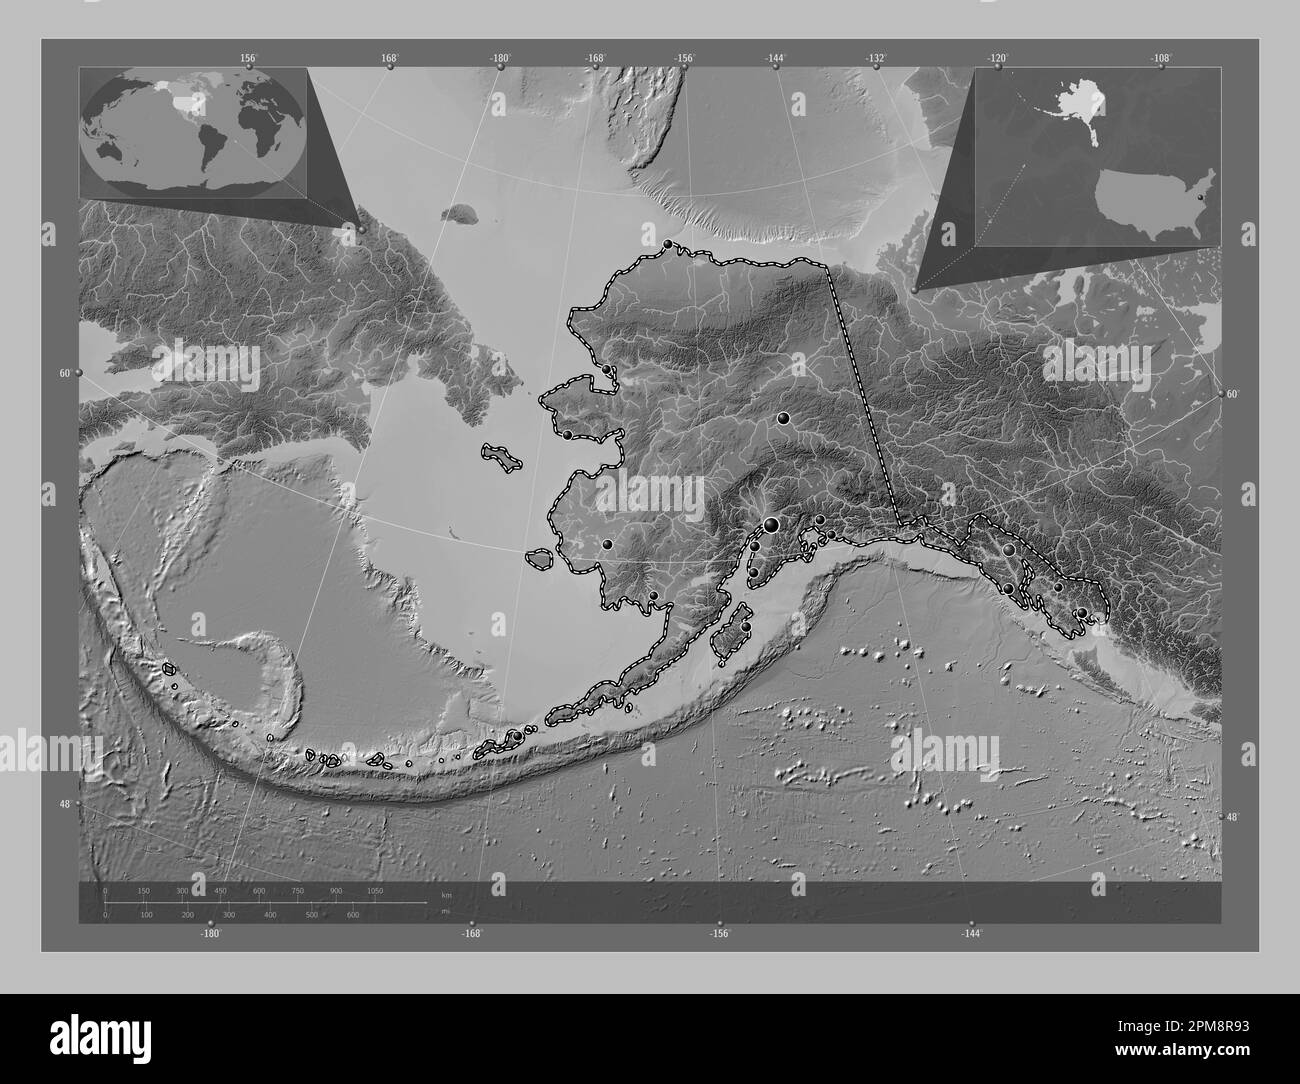 Alaska, state of United States of America. Grayscale elevation map with lakes and rivers. Locations of major cities of the region. Corner auxiliary lo Stock Photo